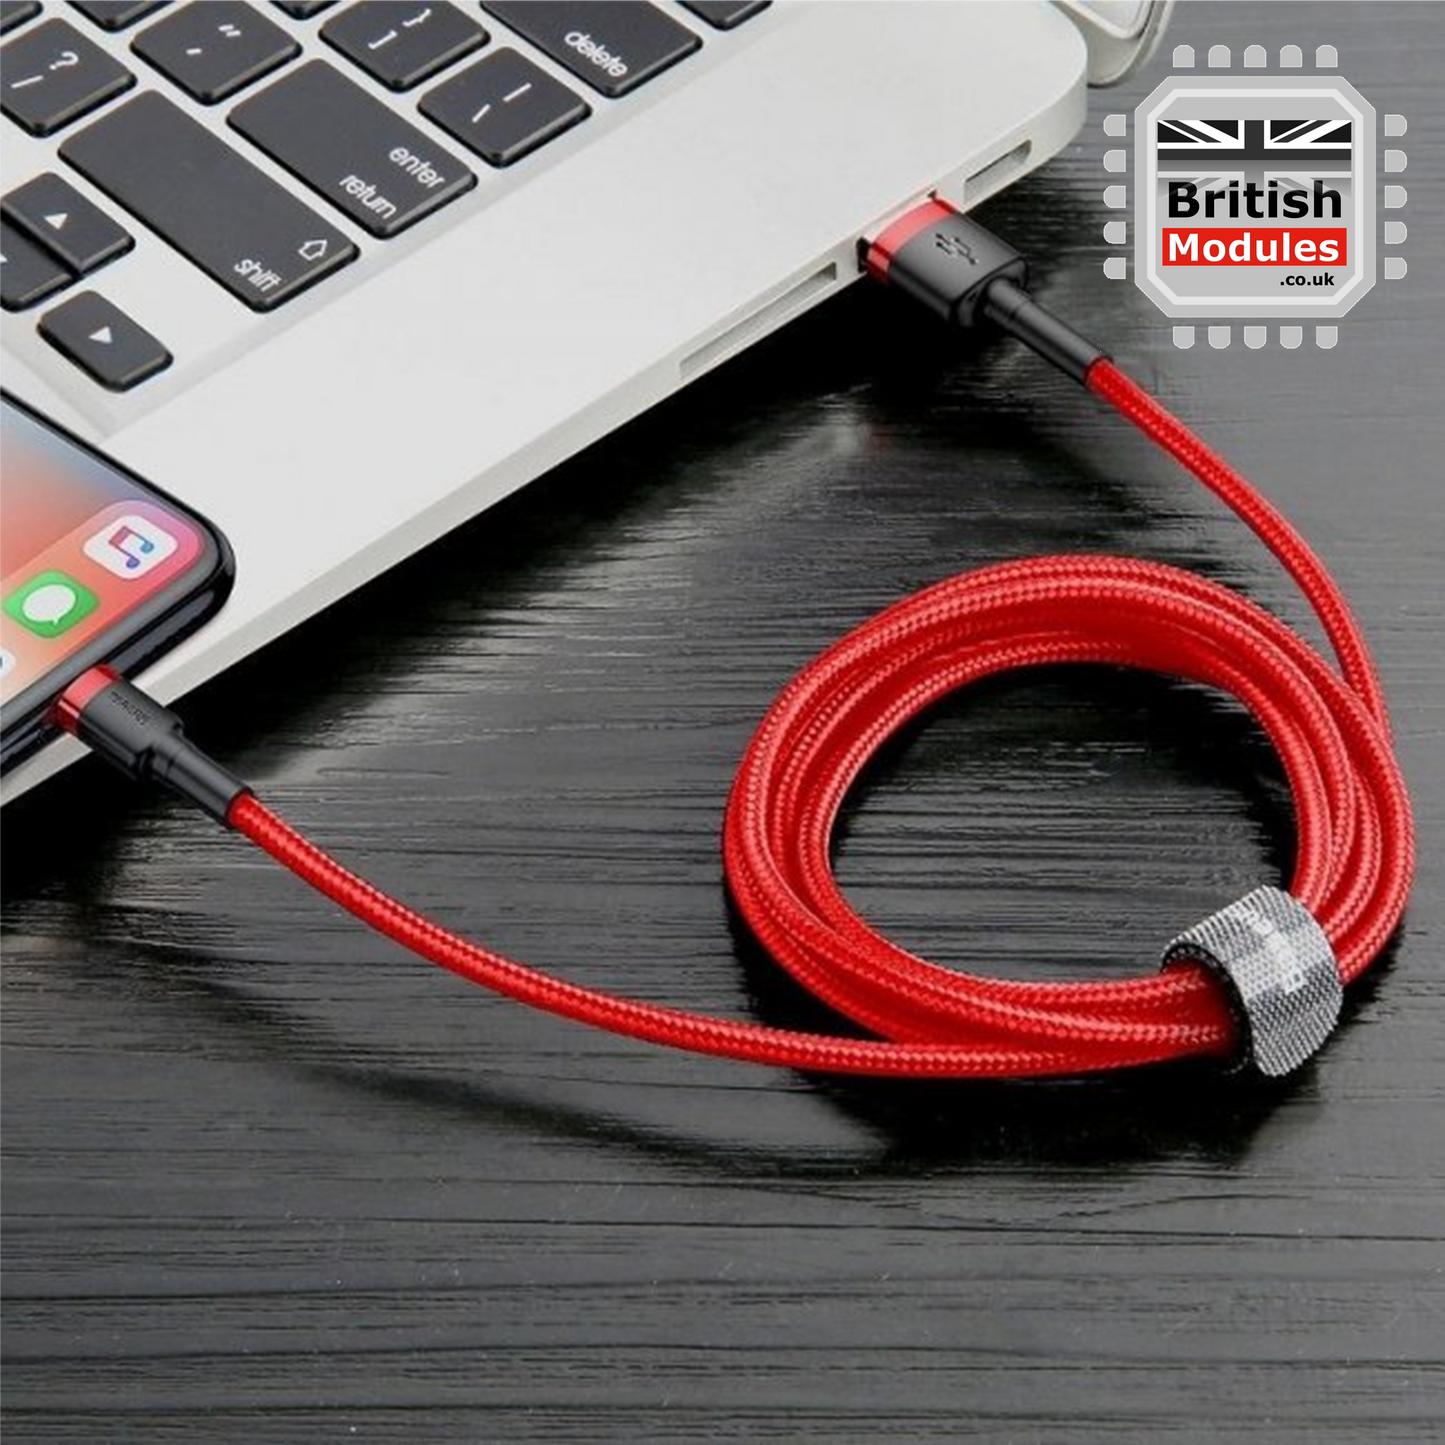 2M Heavy Duty Braided iPhone Lightning Cable 2.4A Fast Charging USB Data Cord for iPhone X, XS, XR, XS Max by Baseus Mix